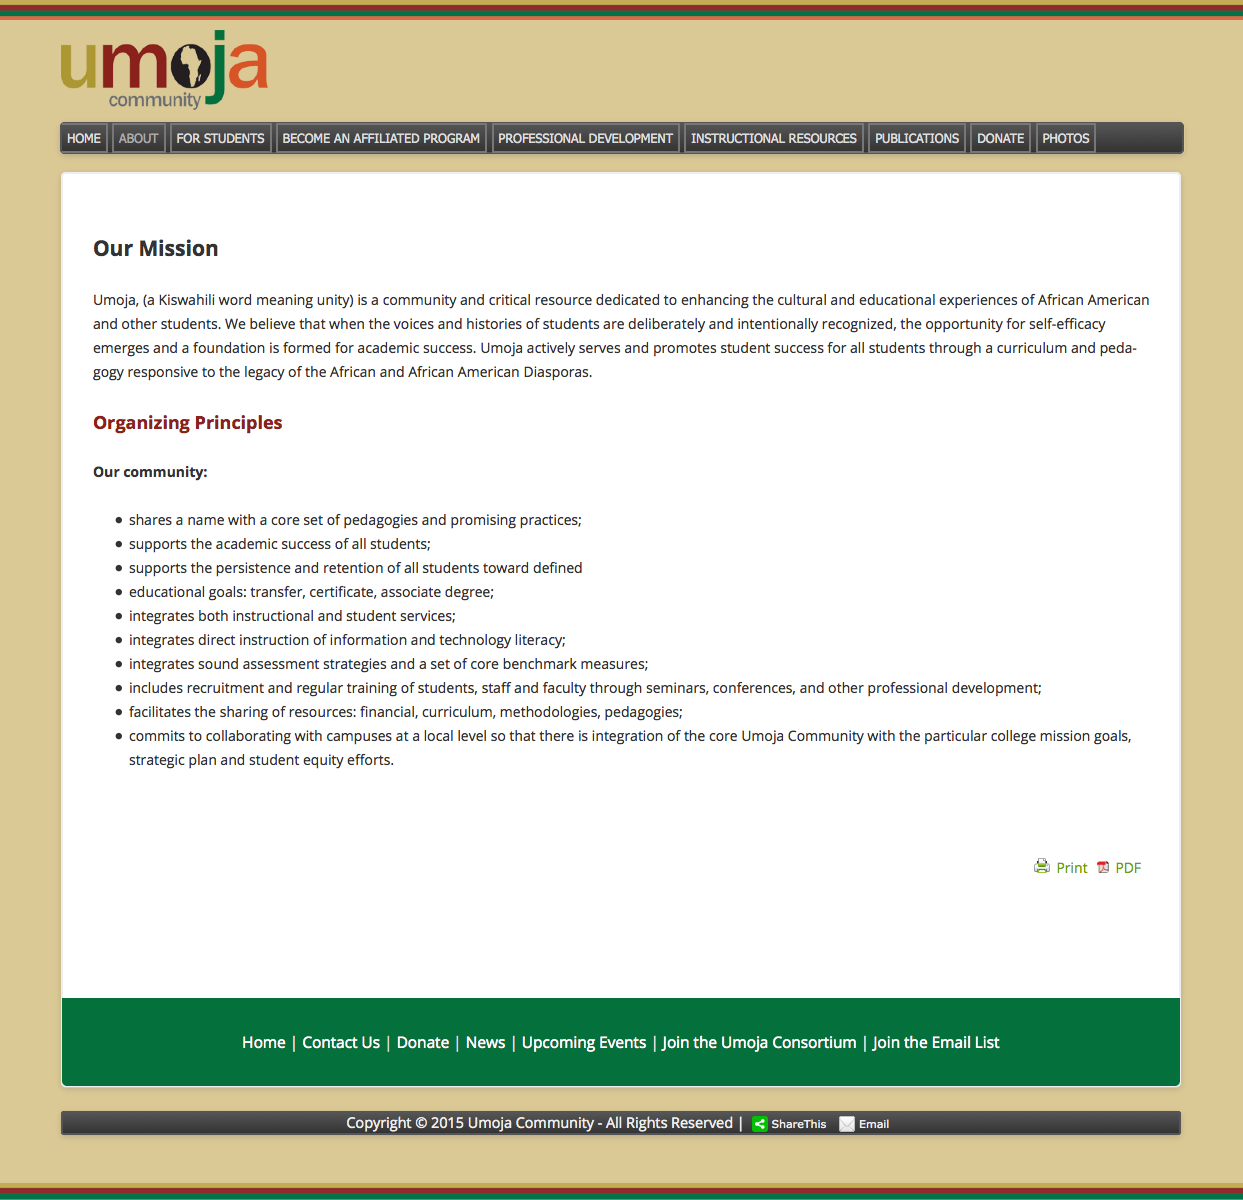 Umoja Website Screen Shot - About Us Page